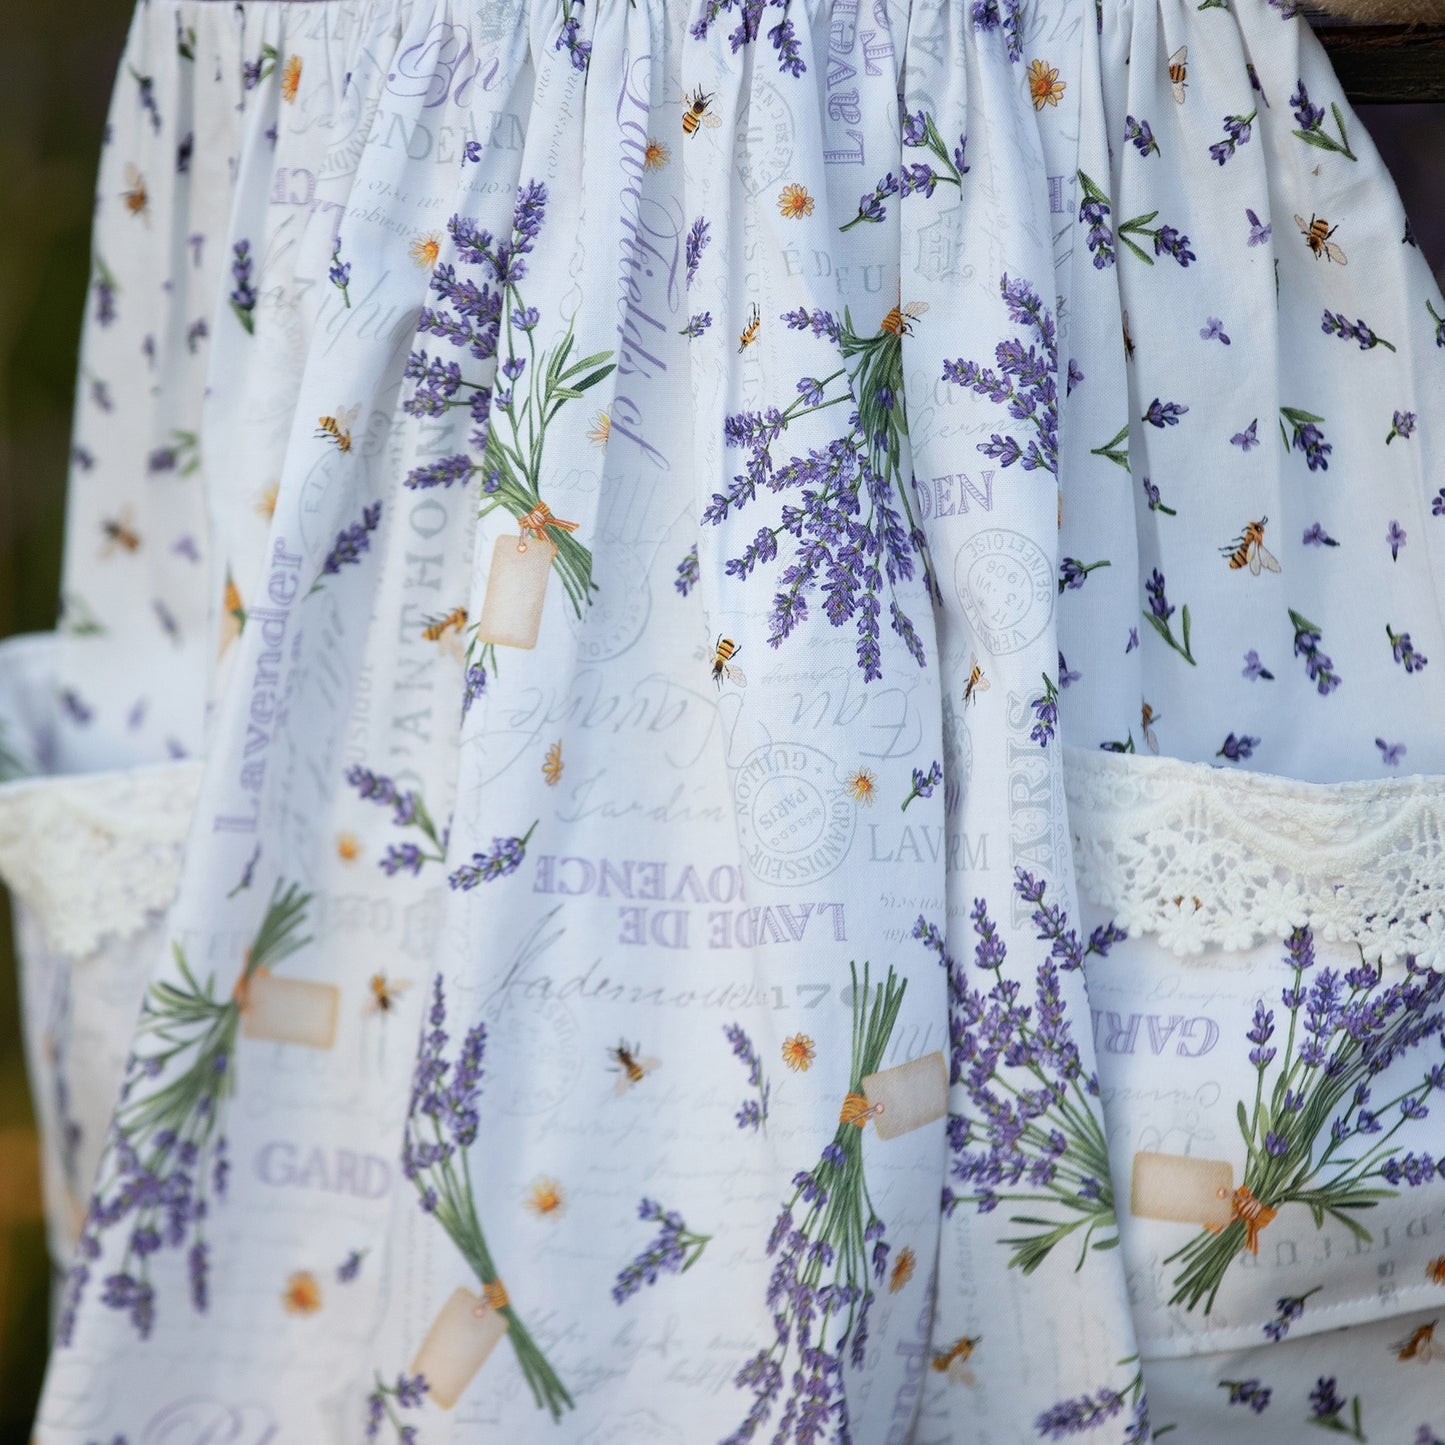 *PREORDER* Lavender printed dress with pockets